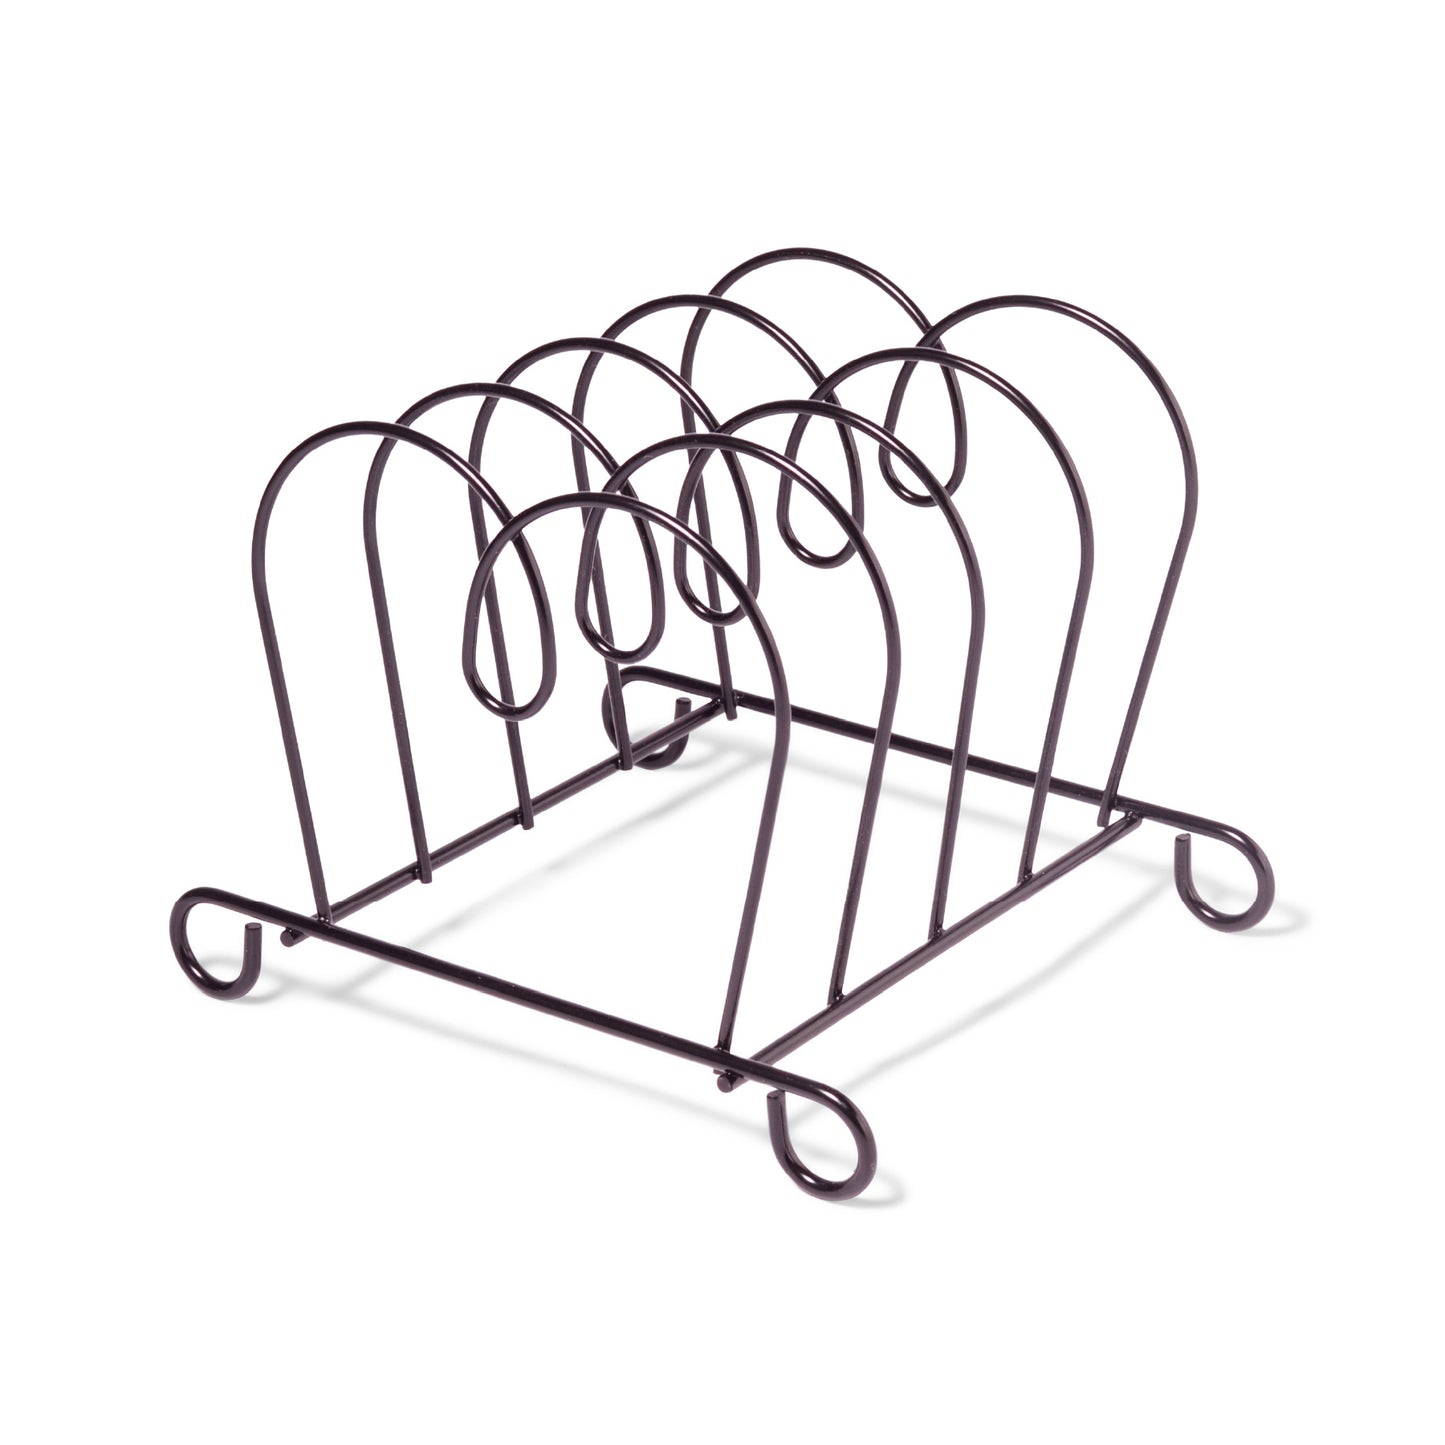 Plate Rack - 4 Section Plate Rack